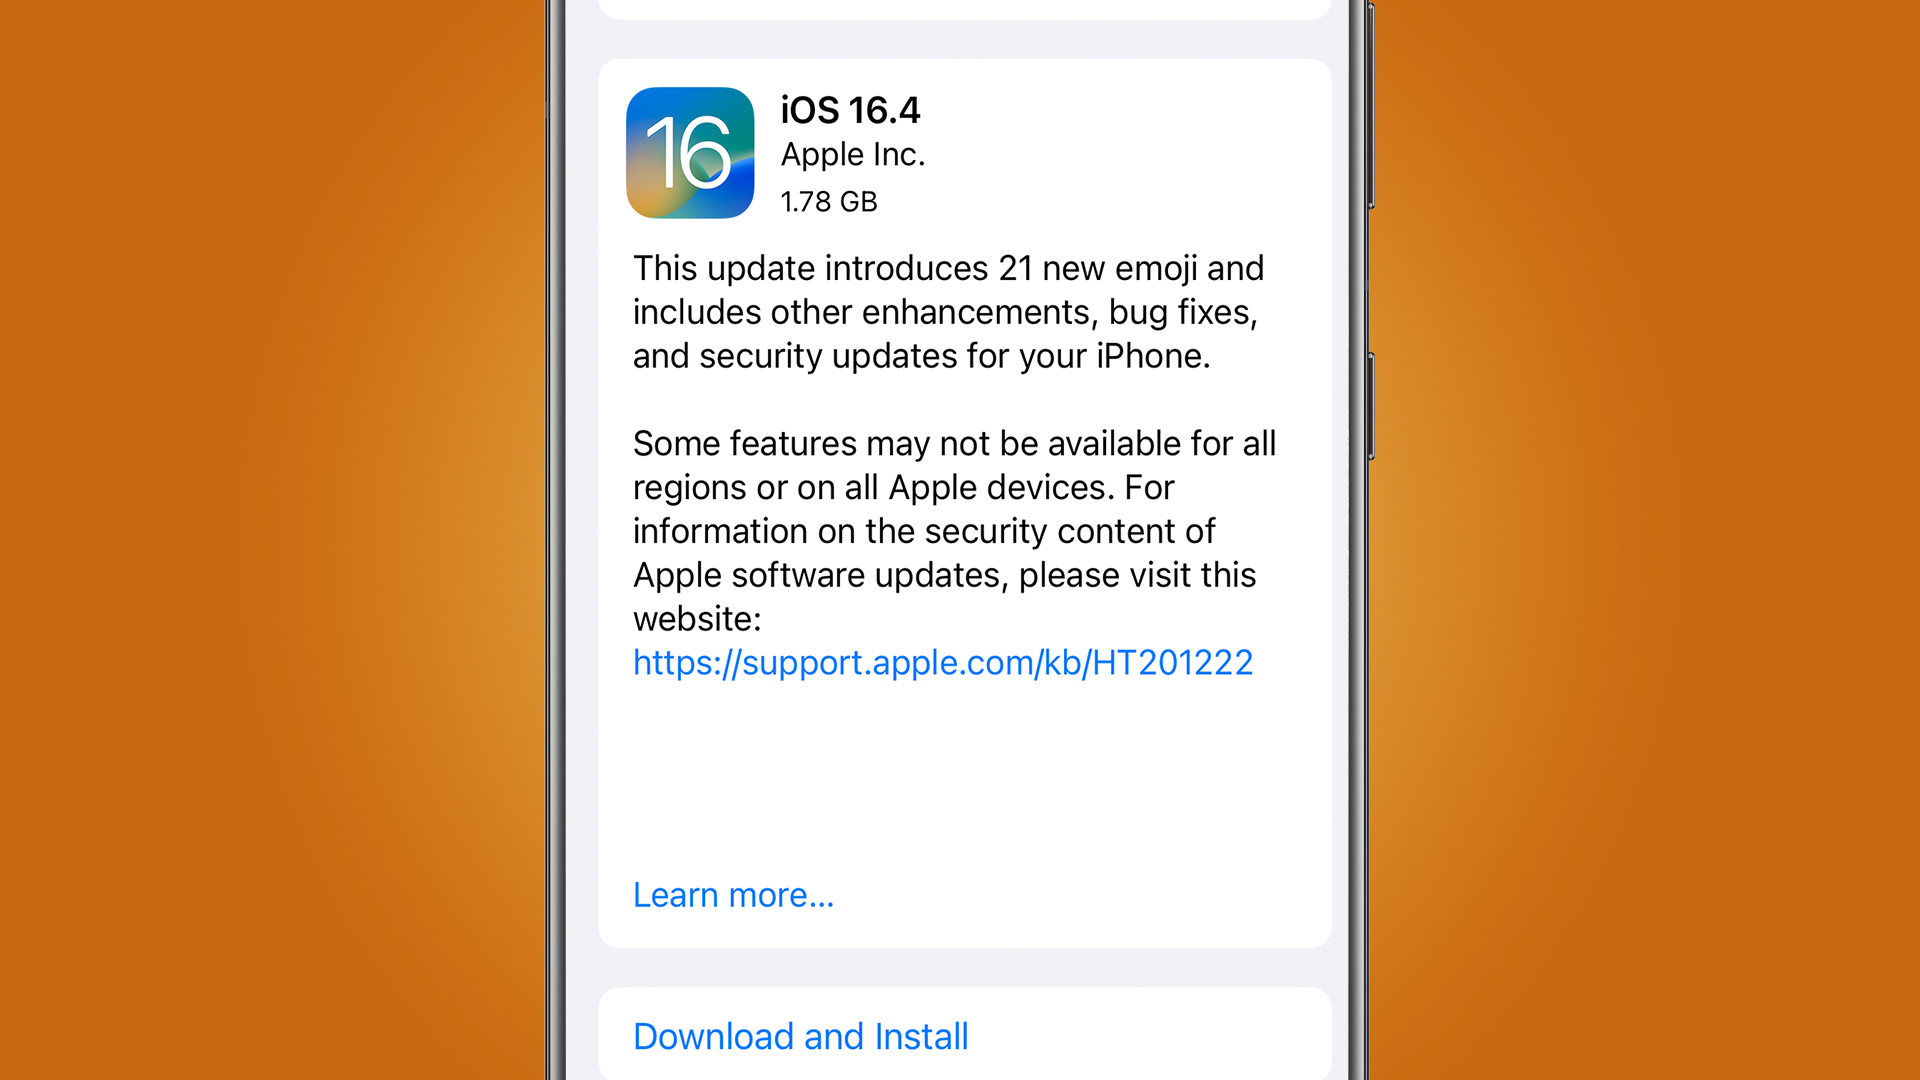 An iPhone on an orange background showing the iOS 16.4 update screen